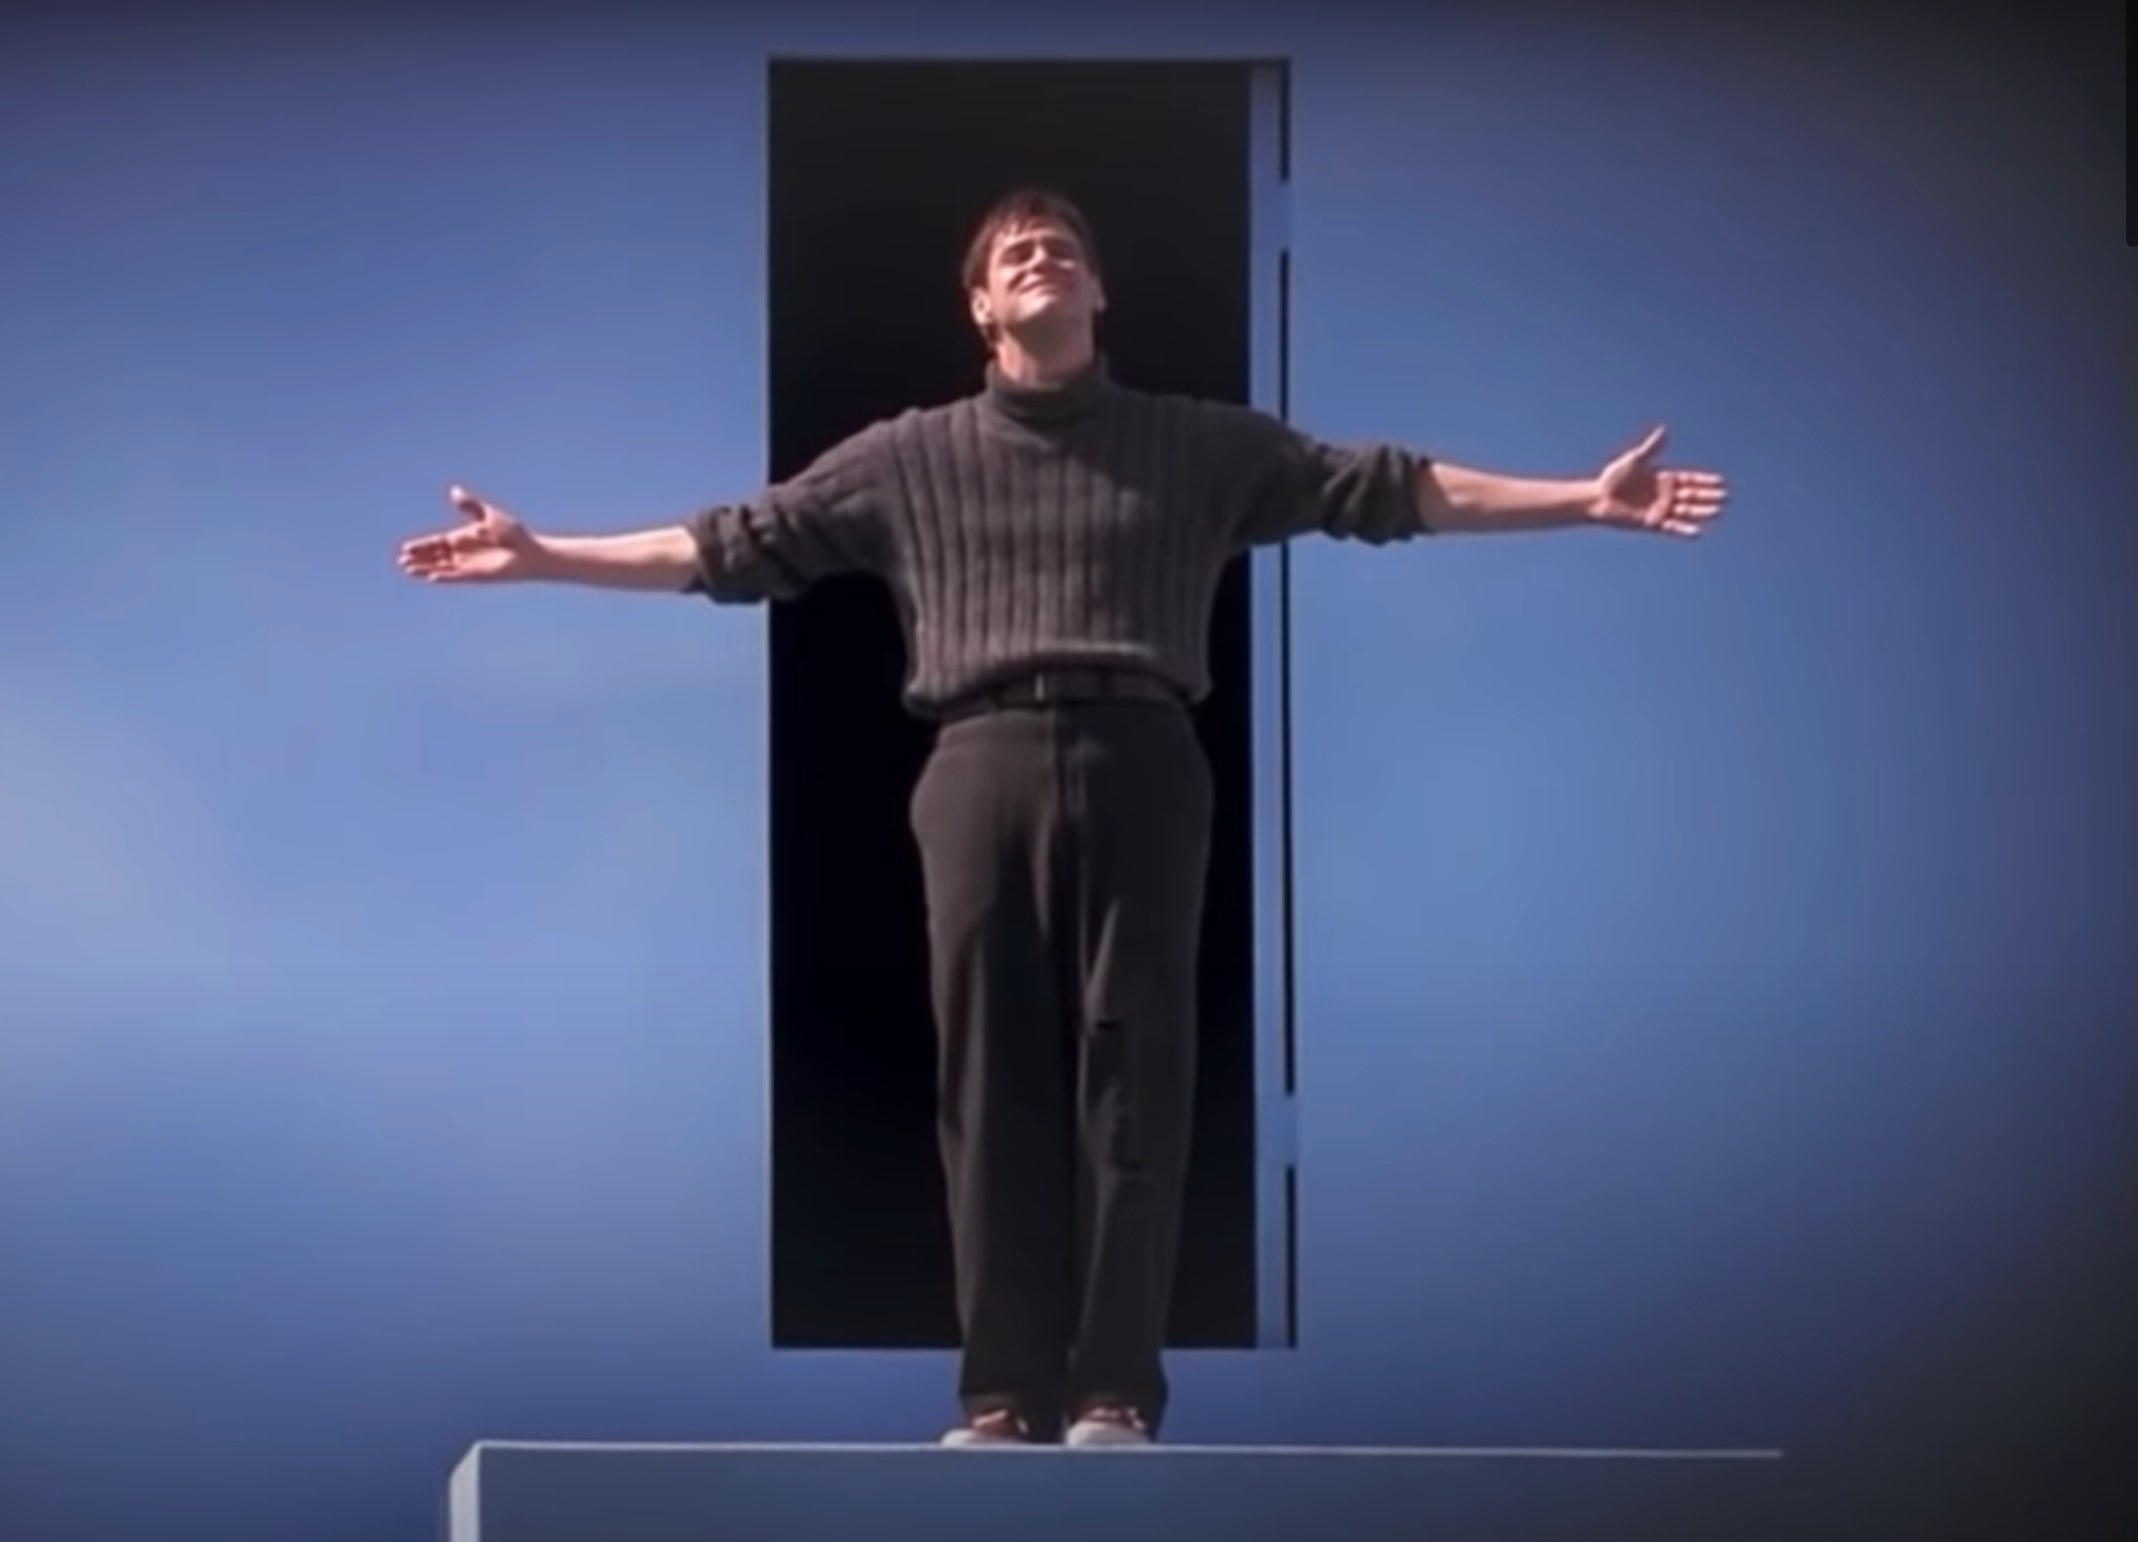 Truman finishes a bow before walking through the exit door in &quot;The Truman Show&quot;